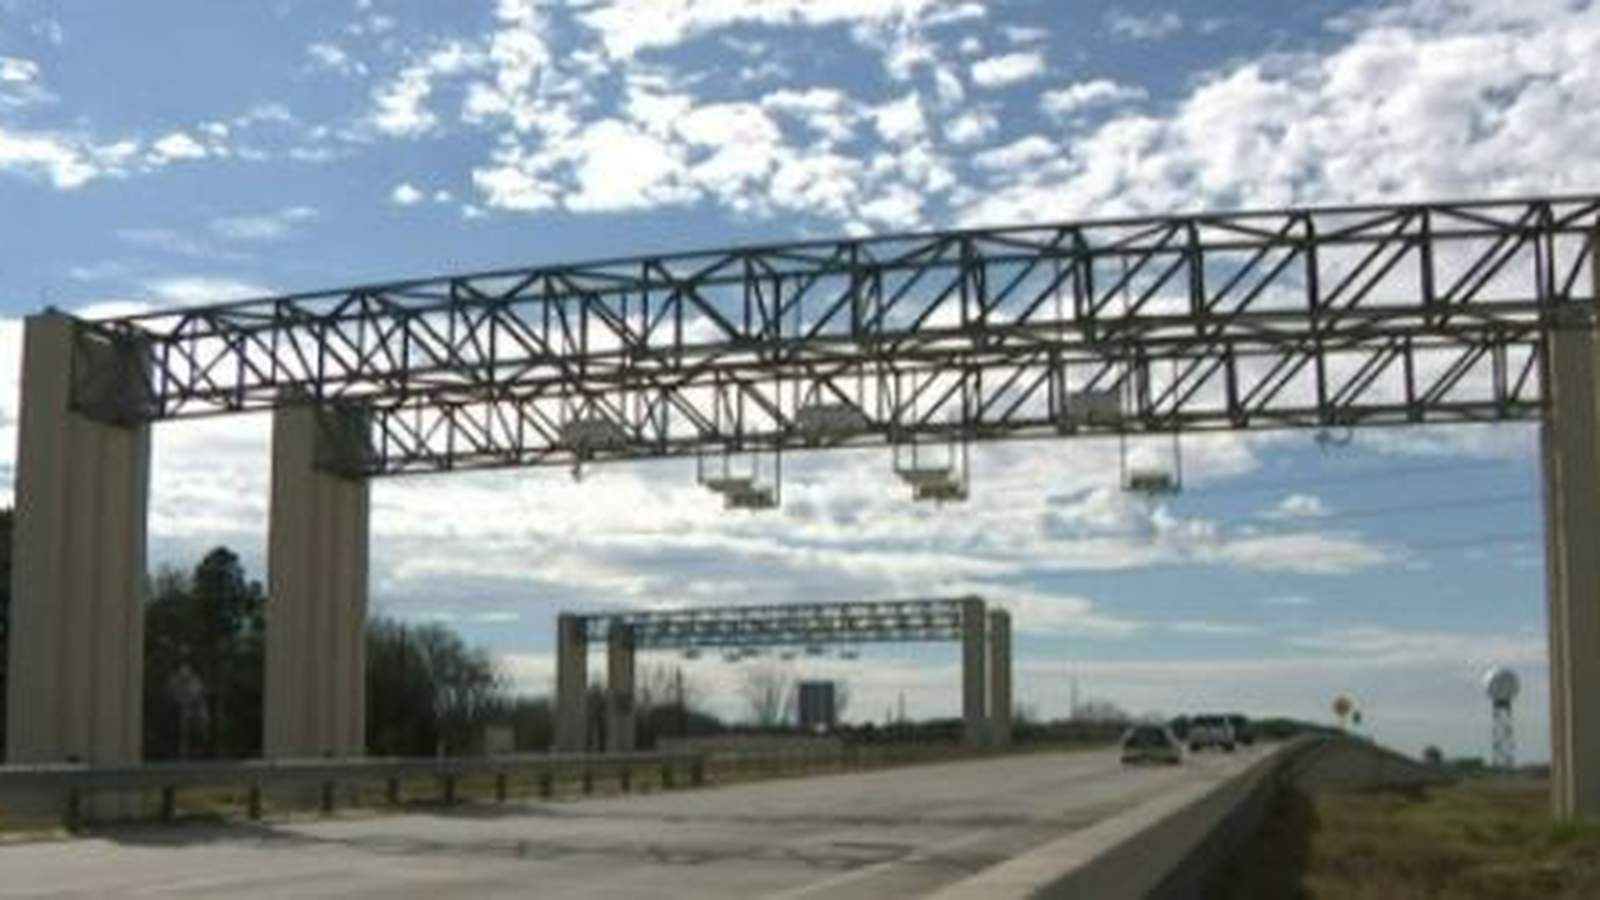 Toll Road drivers: Brace yourself for some big bills